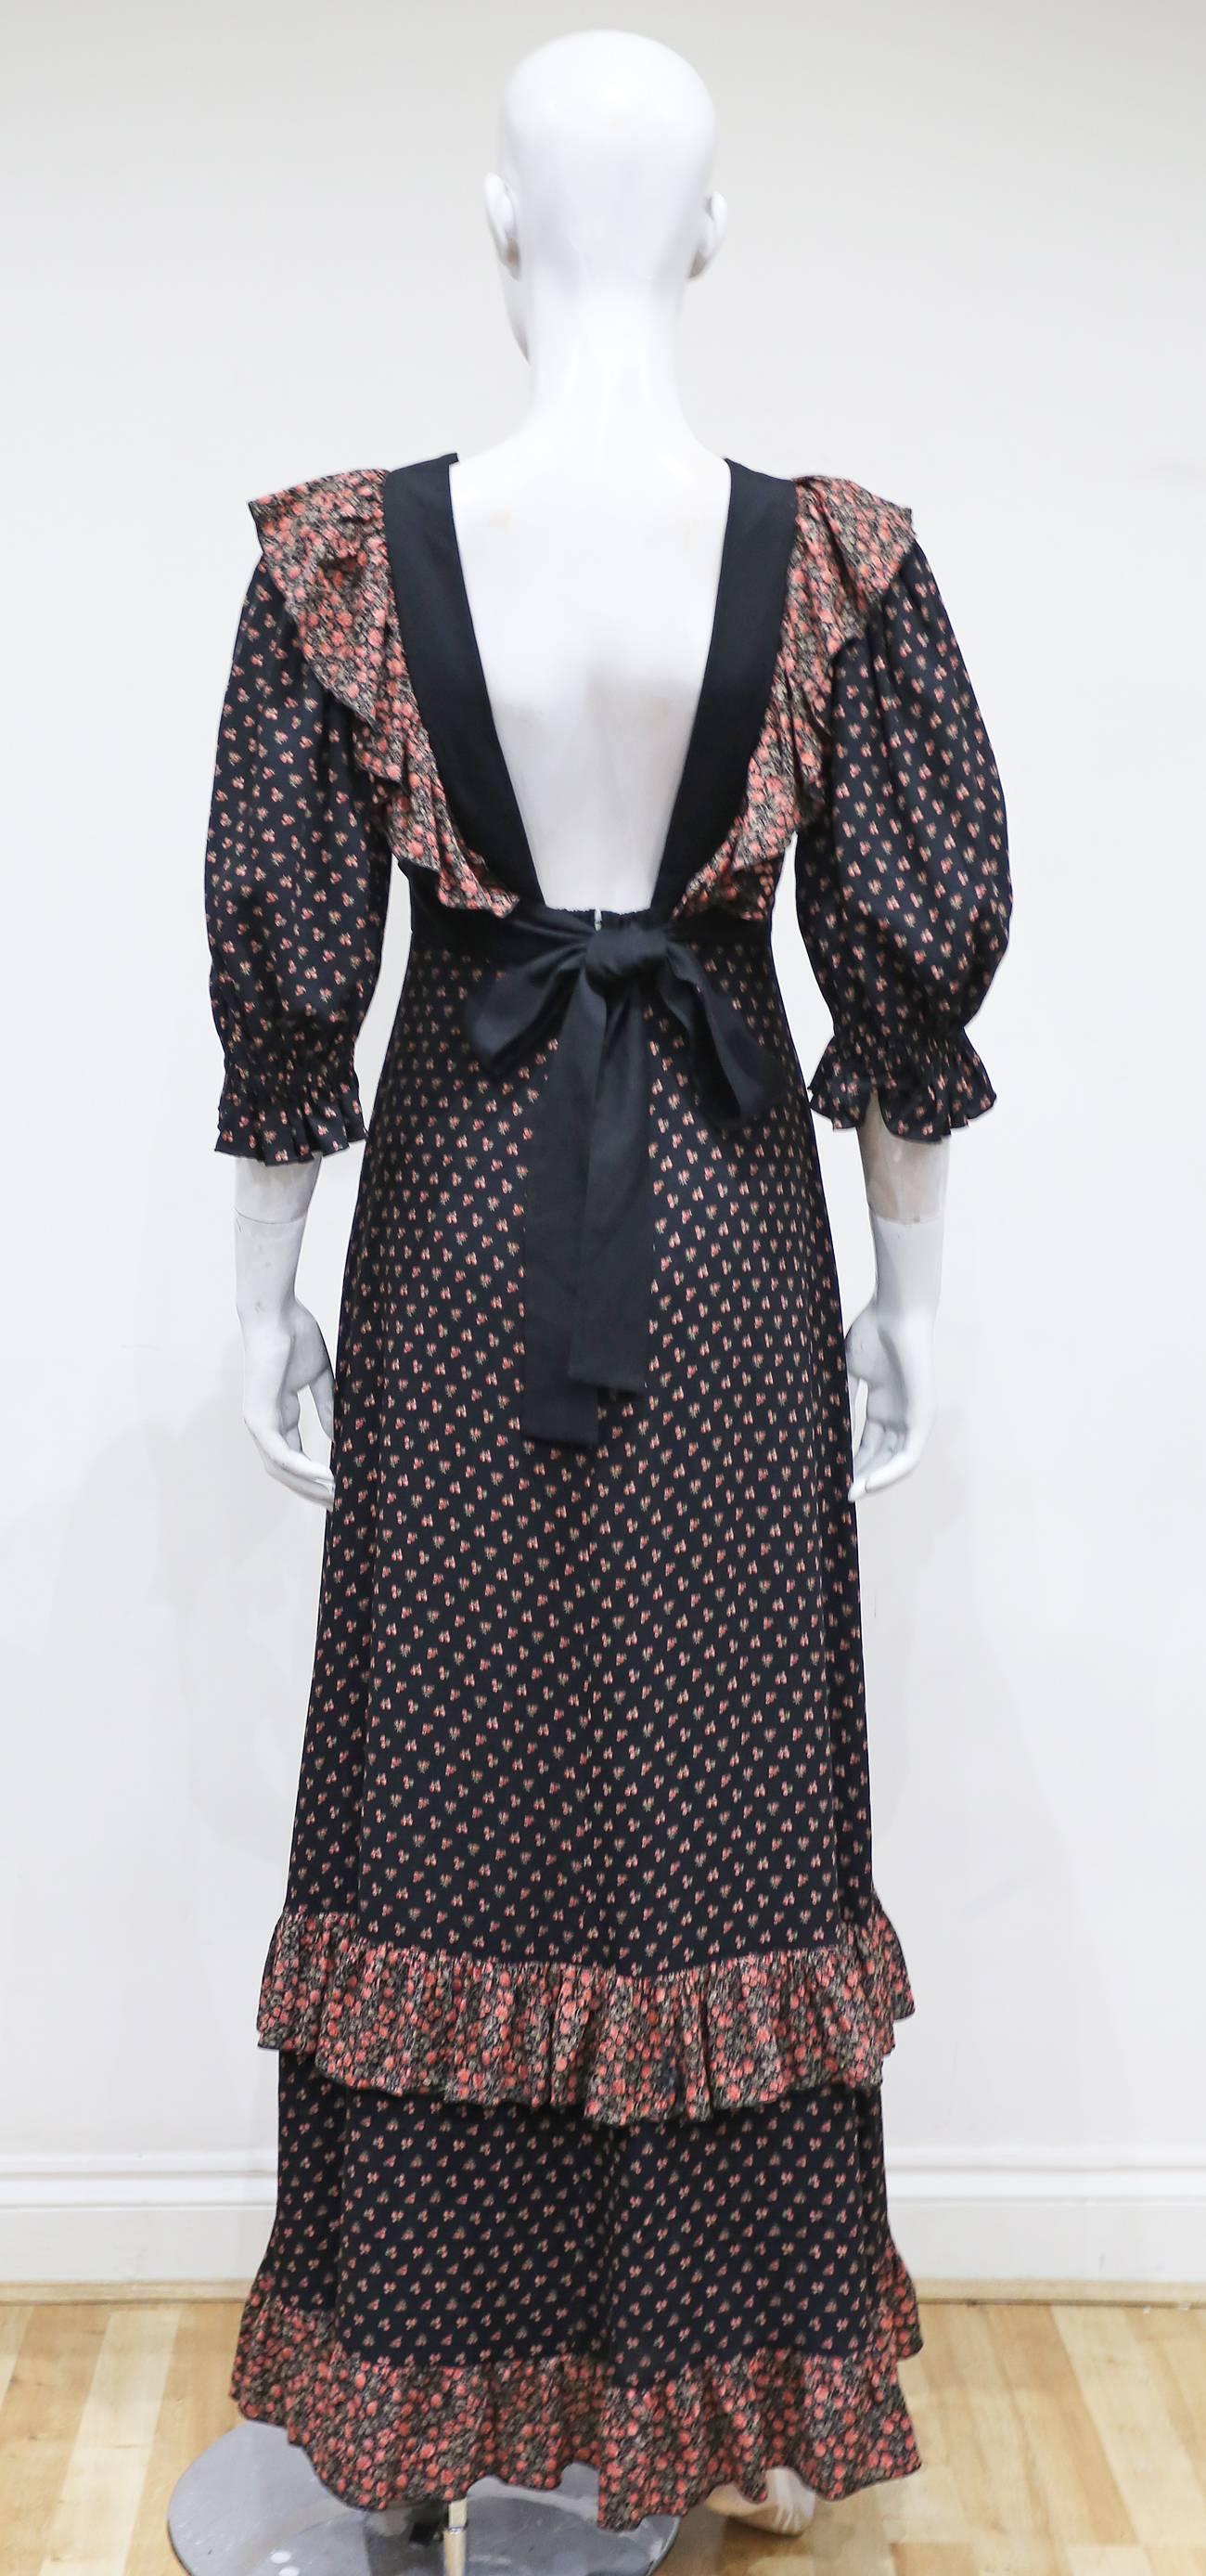 Black Gina Fratini floral maxi dress with low back, c. 1970s